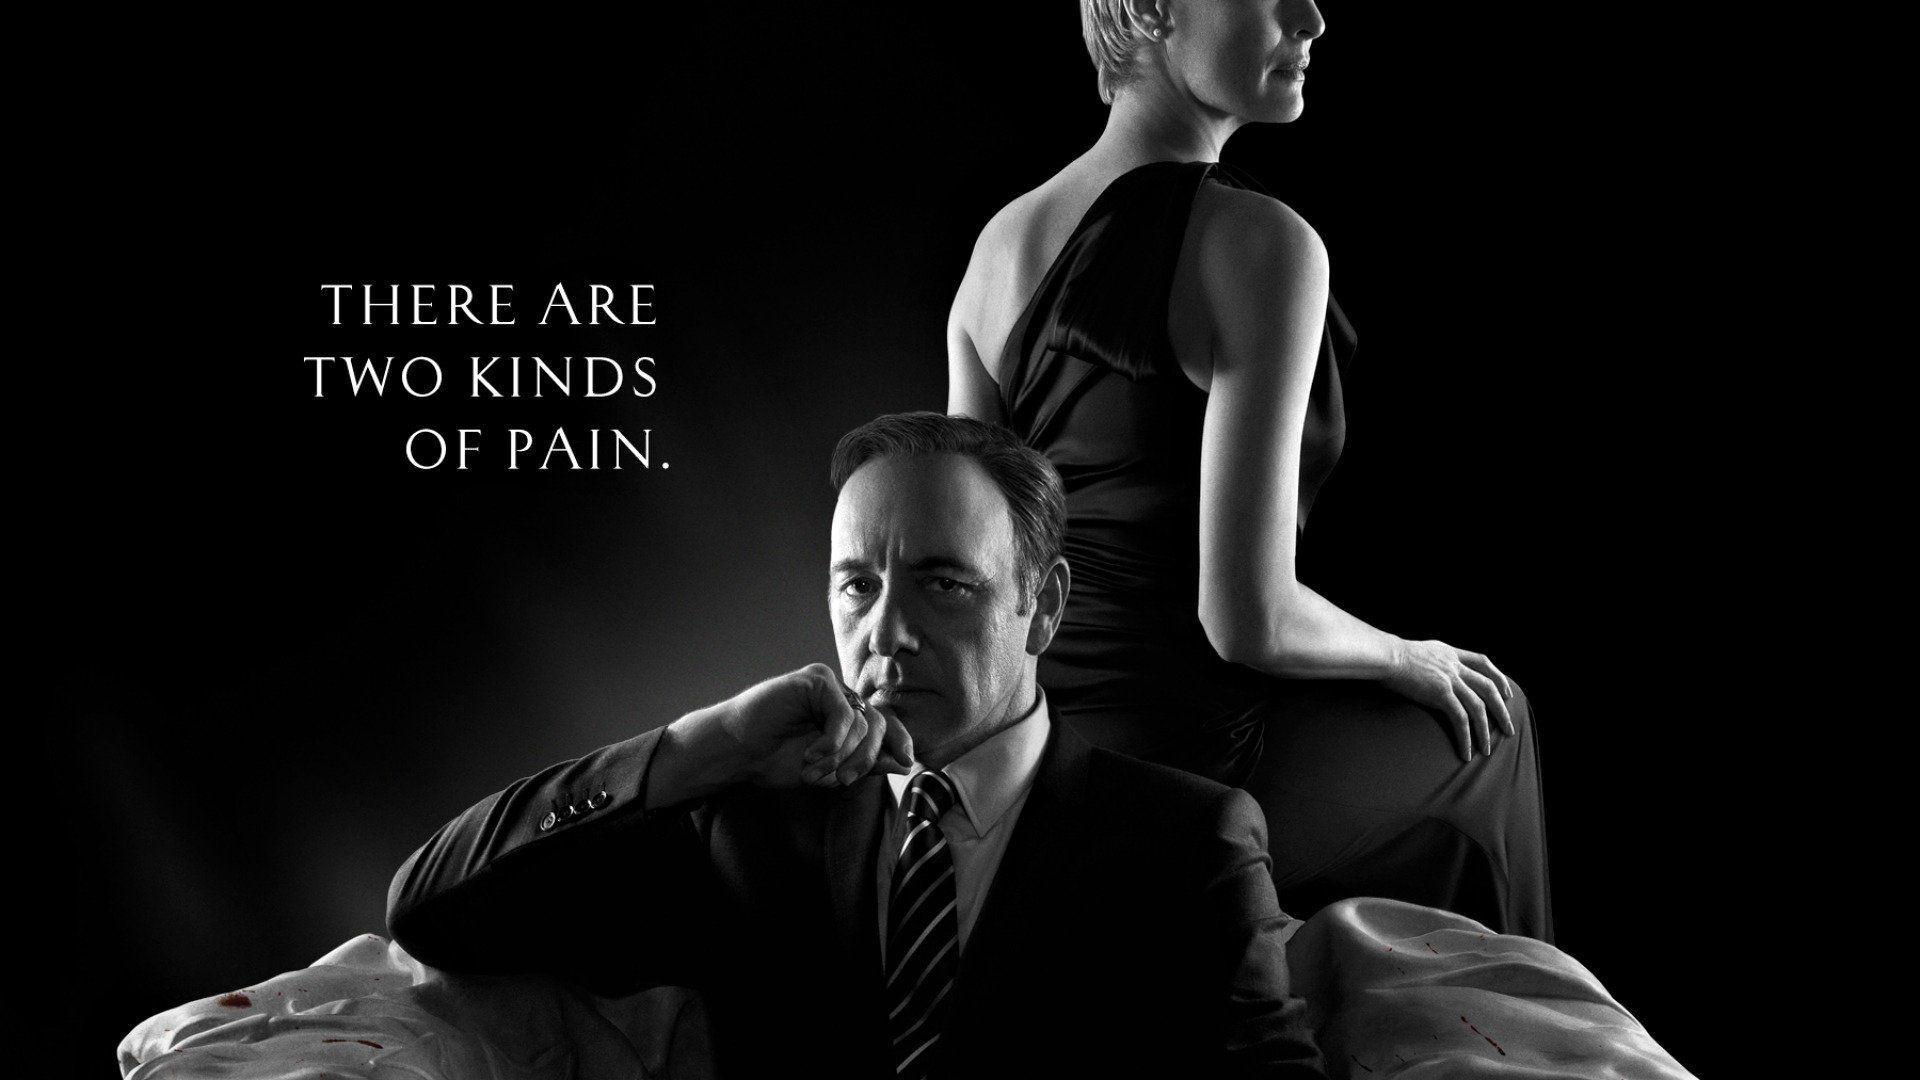 House of Cards Wallpaper